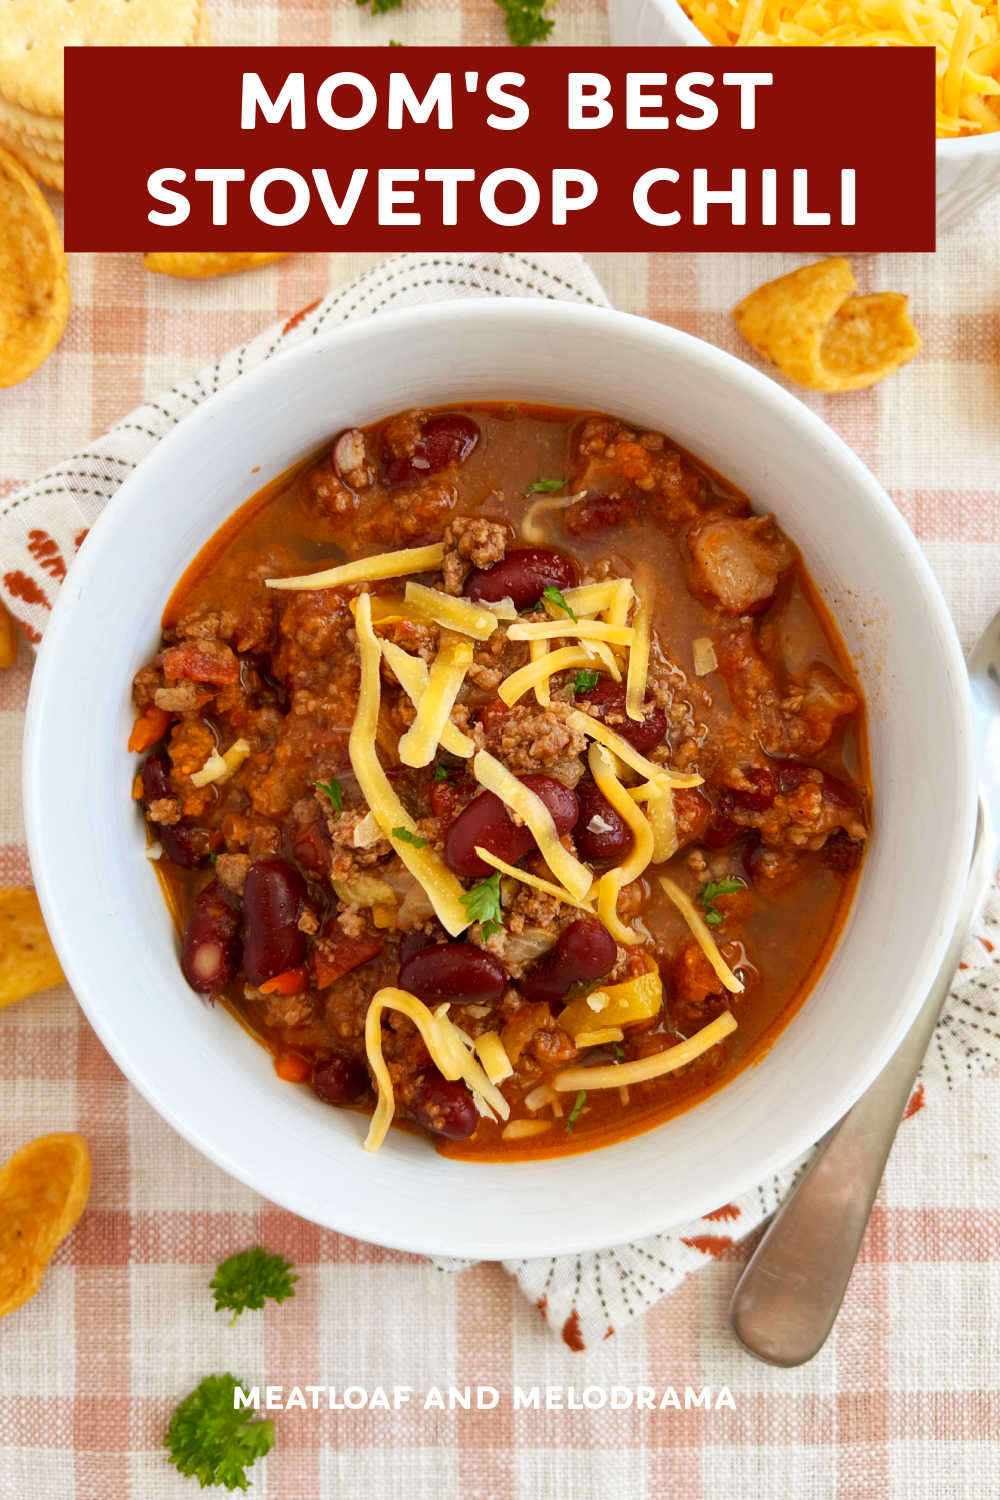 Mom's Best Chili Recipe is a mild chili recipe with ground beef that is easy to make on the stovetop or slow cooker. It's perfect when you're craving simple comfort food from home! via @meamel